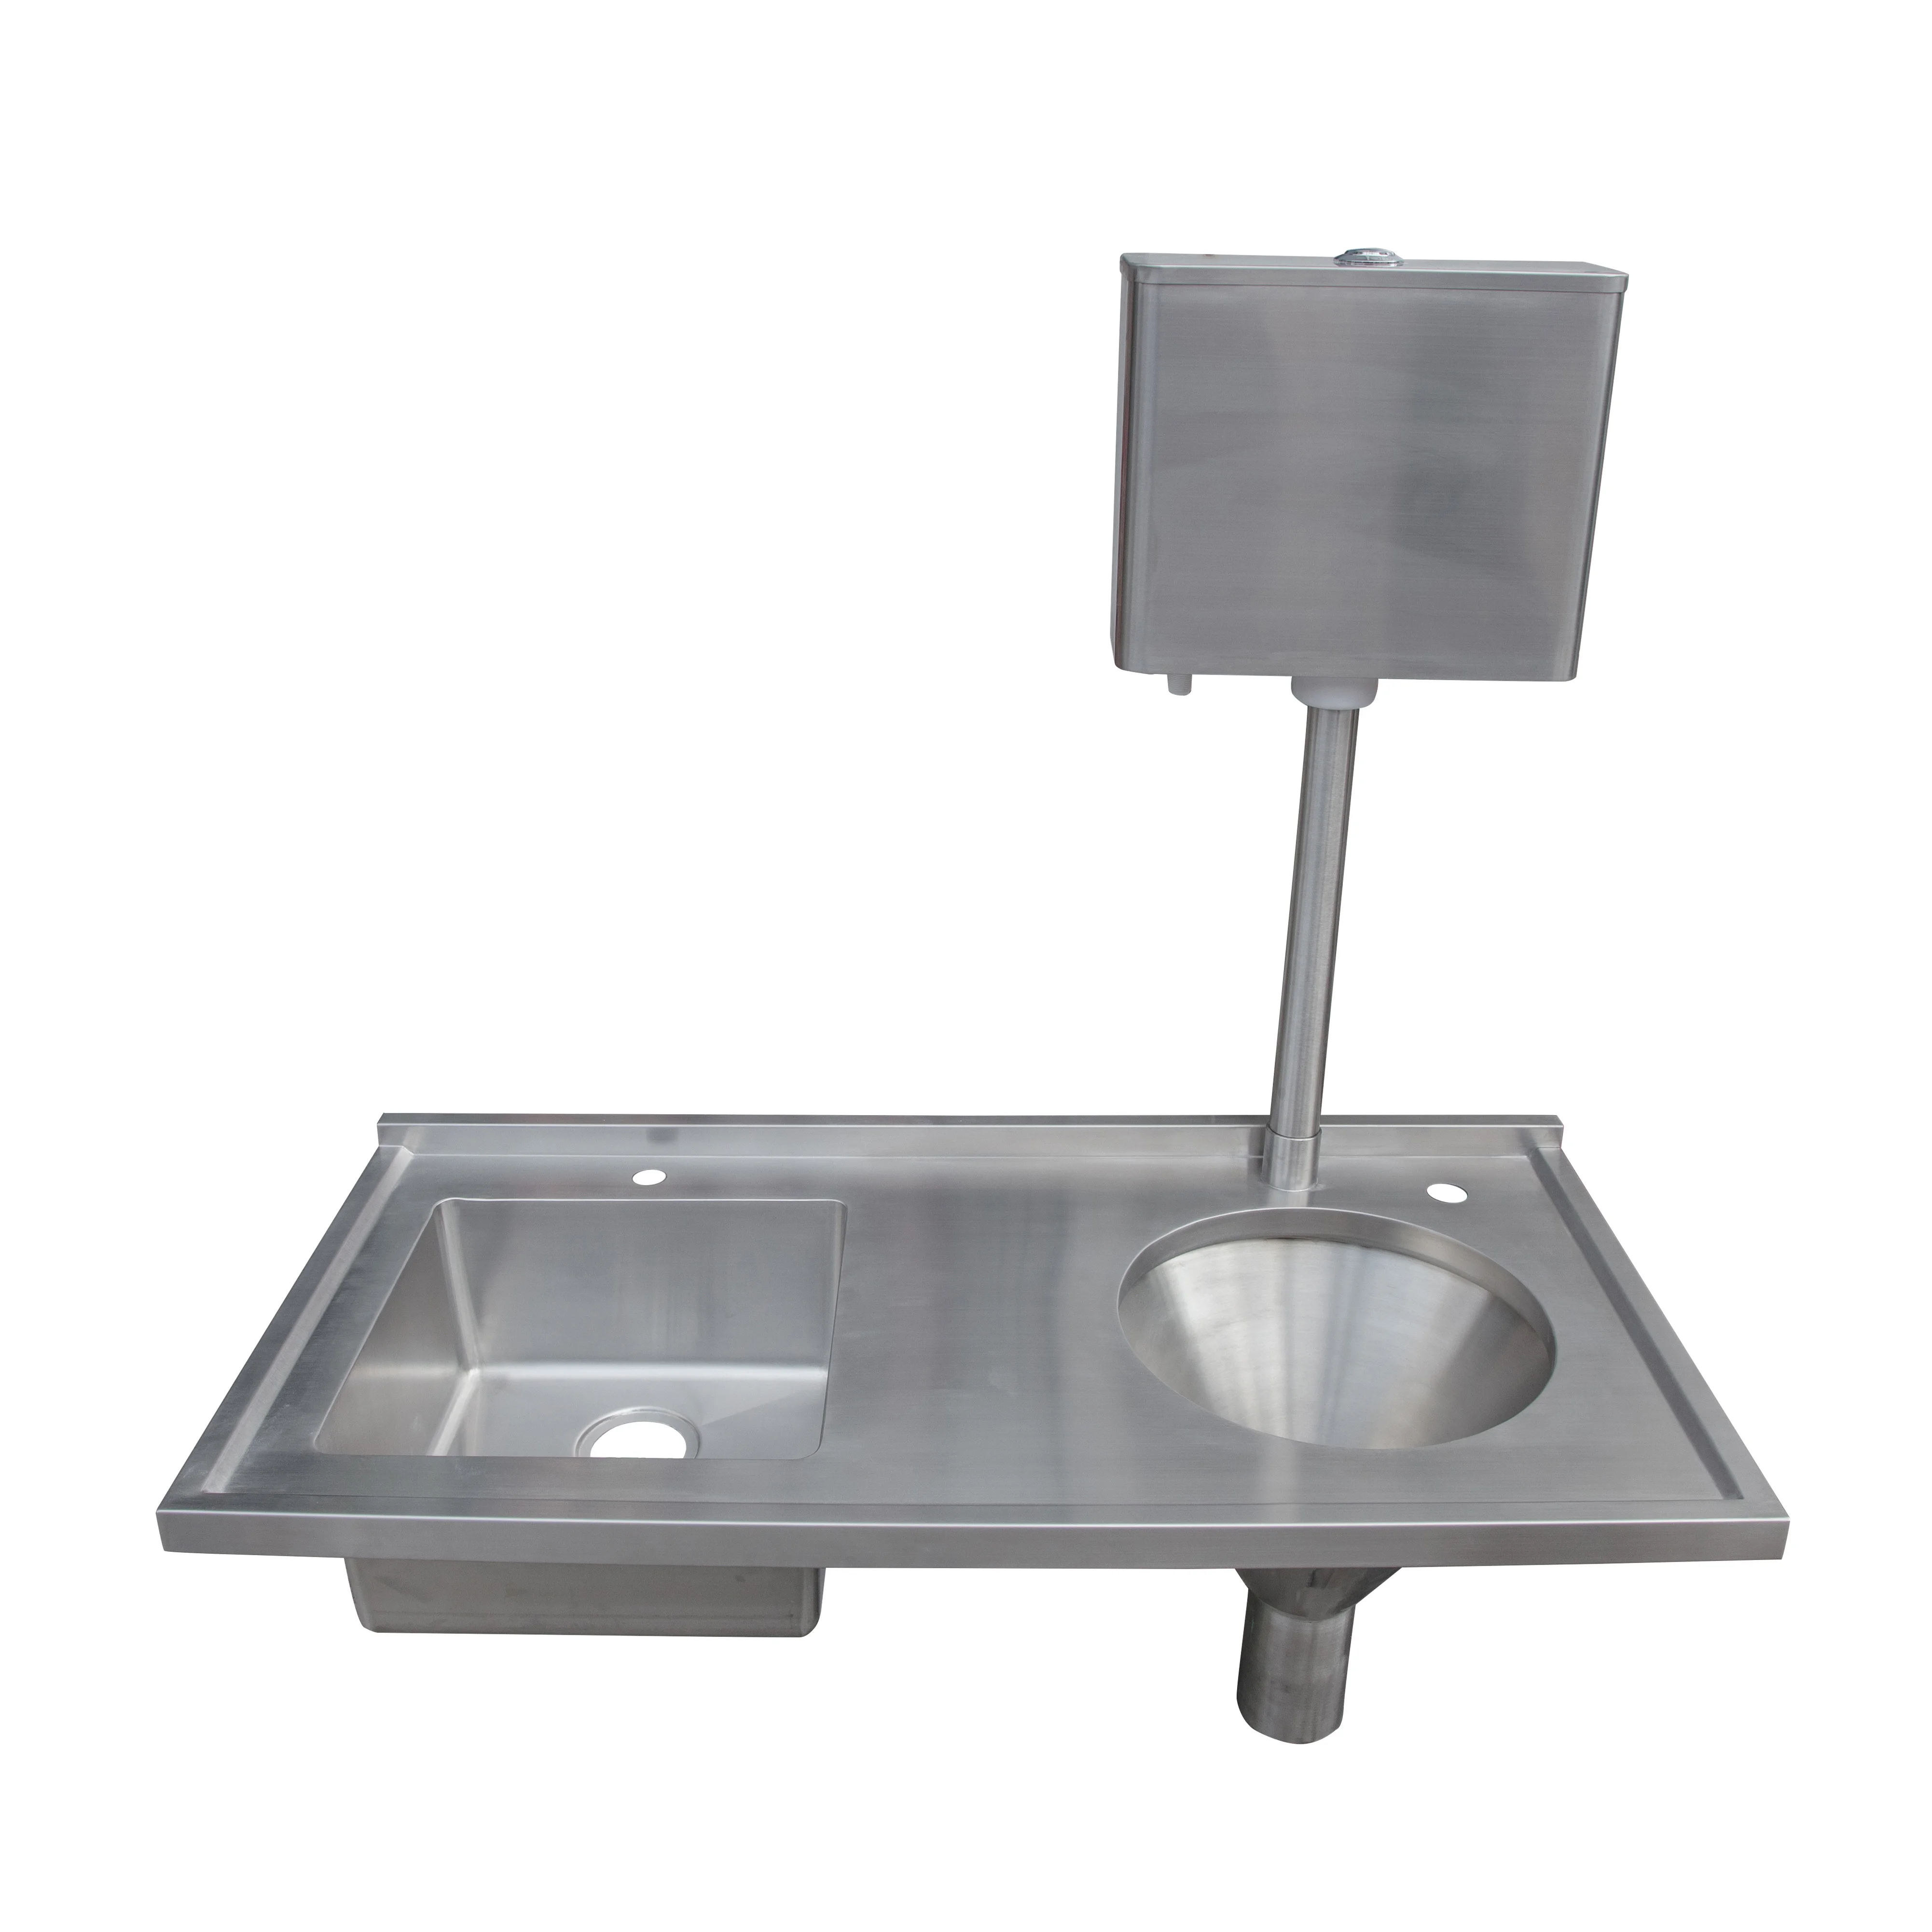 
First class wash mop sink knee operated sink 